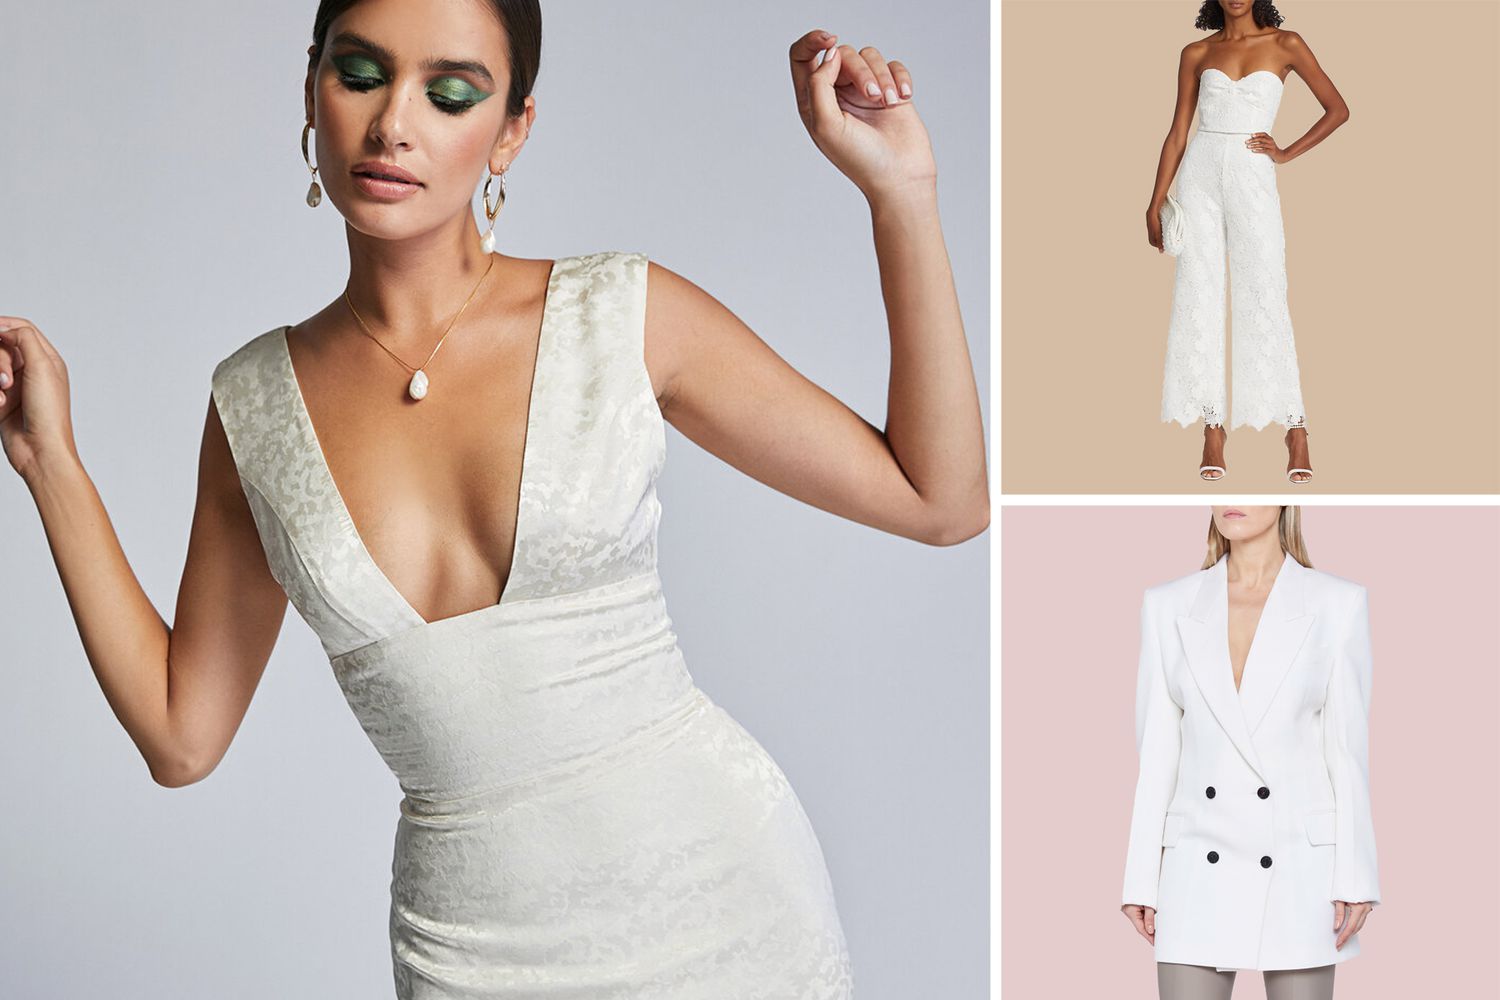 15 City Hall Wedding Dress Ideas for Your Courthouse Ceremony